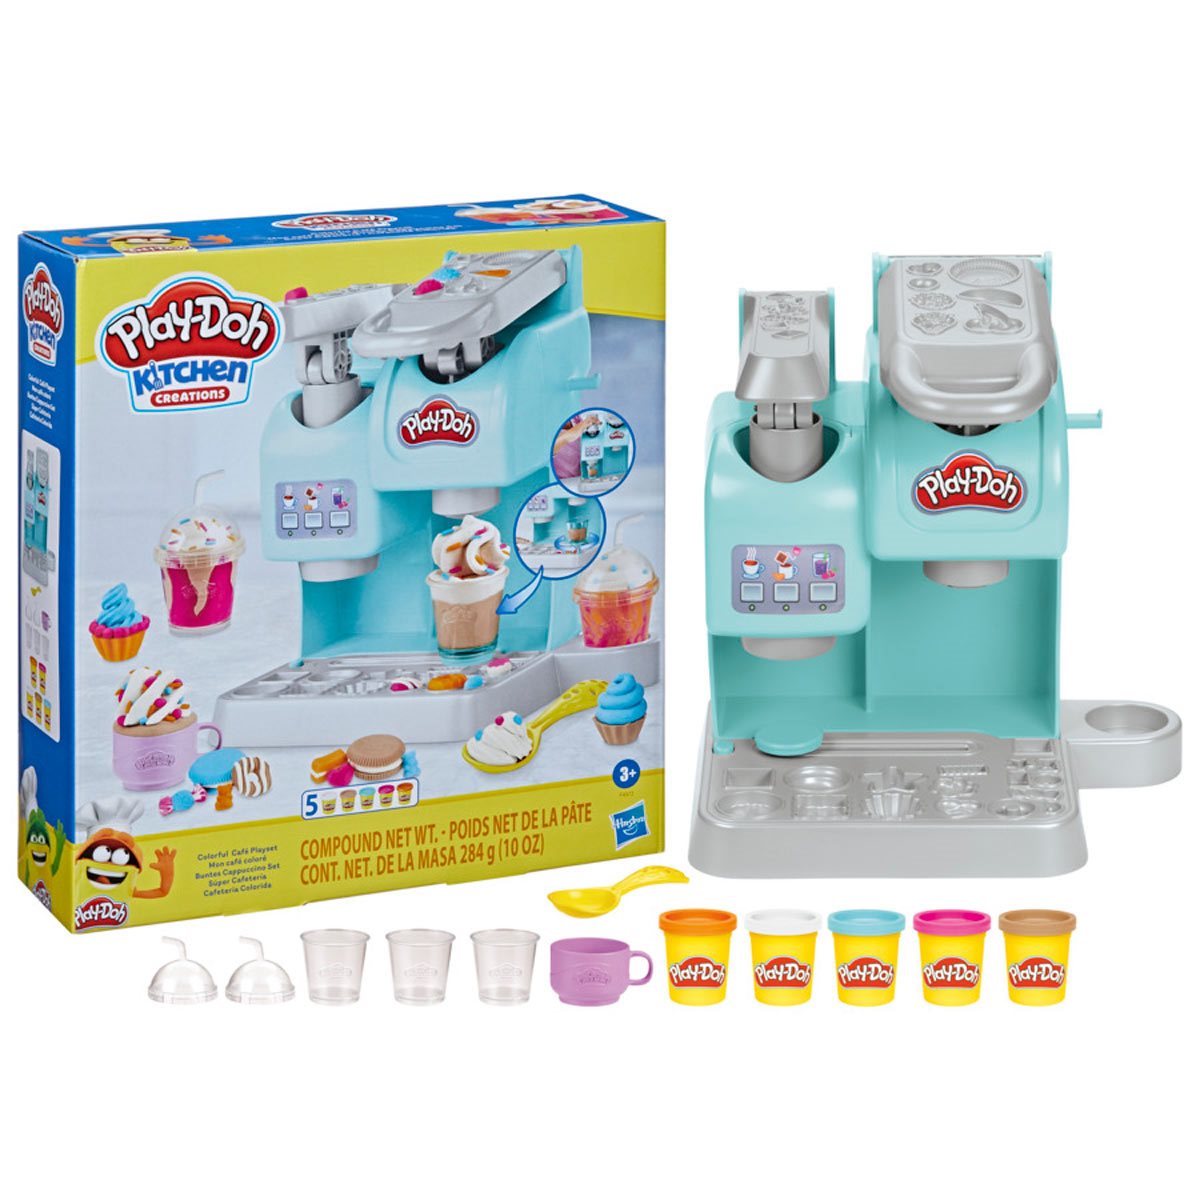 Play-Doh Kitchen Creations Giftable Playset Wave 1 Case of 3